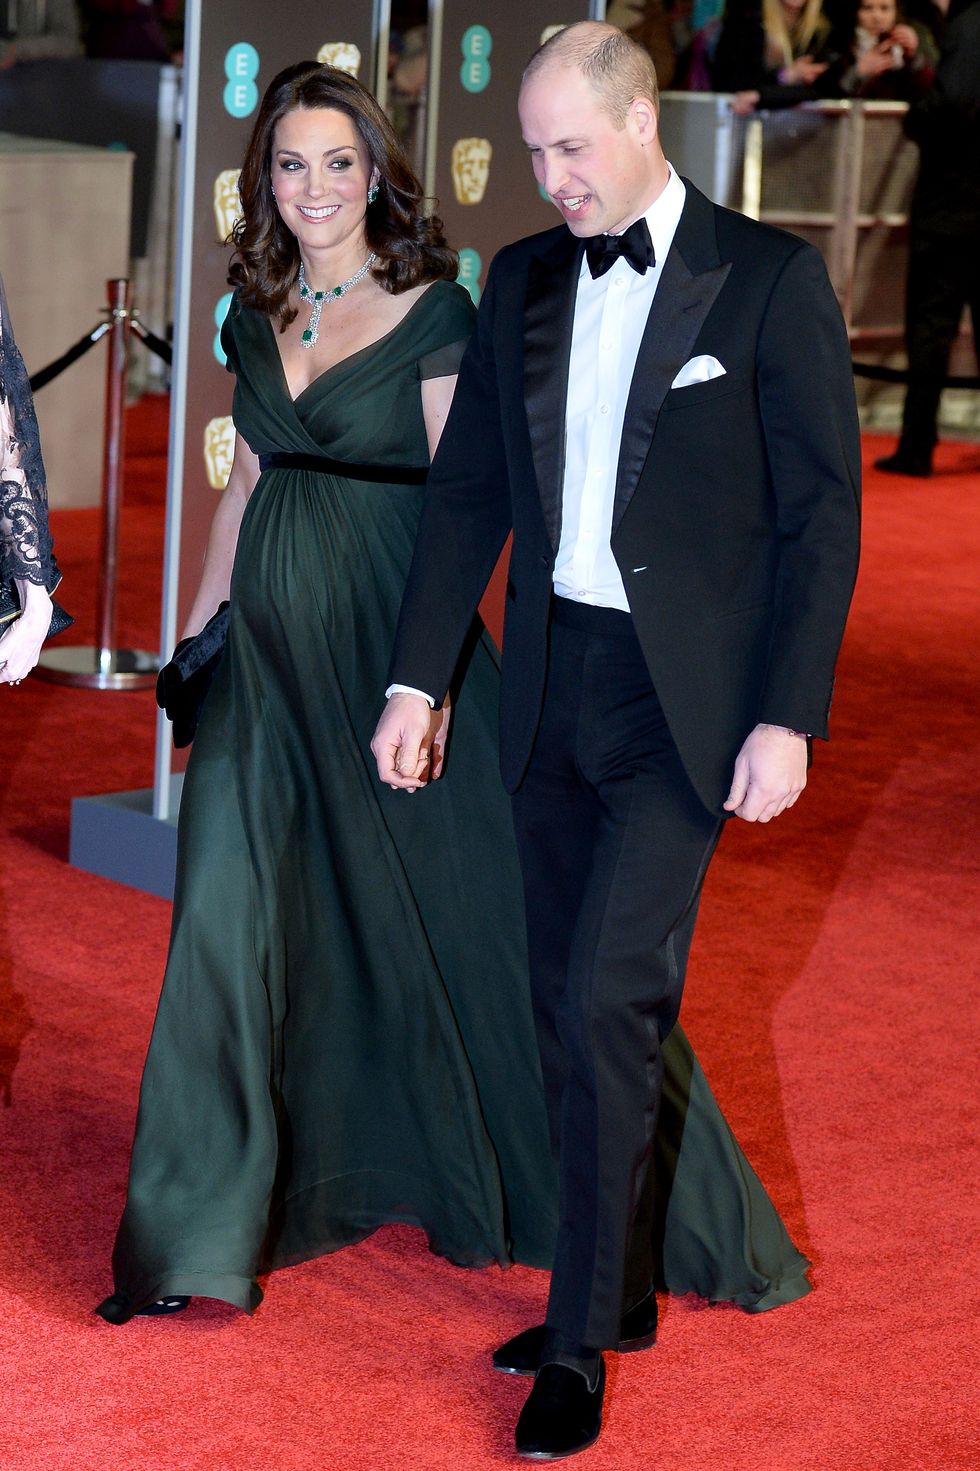 The Duke and Duchess of Cambridge at the 2019 BAFTAs